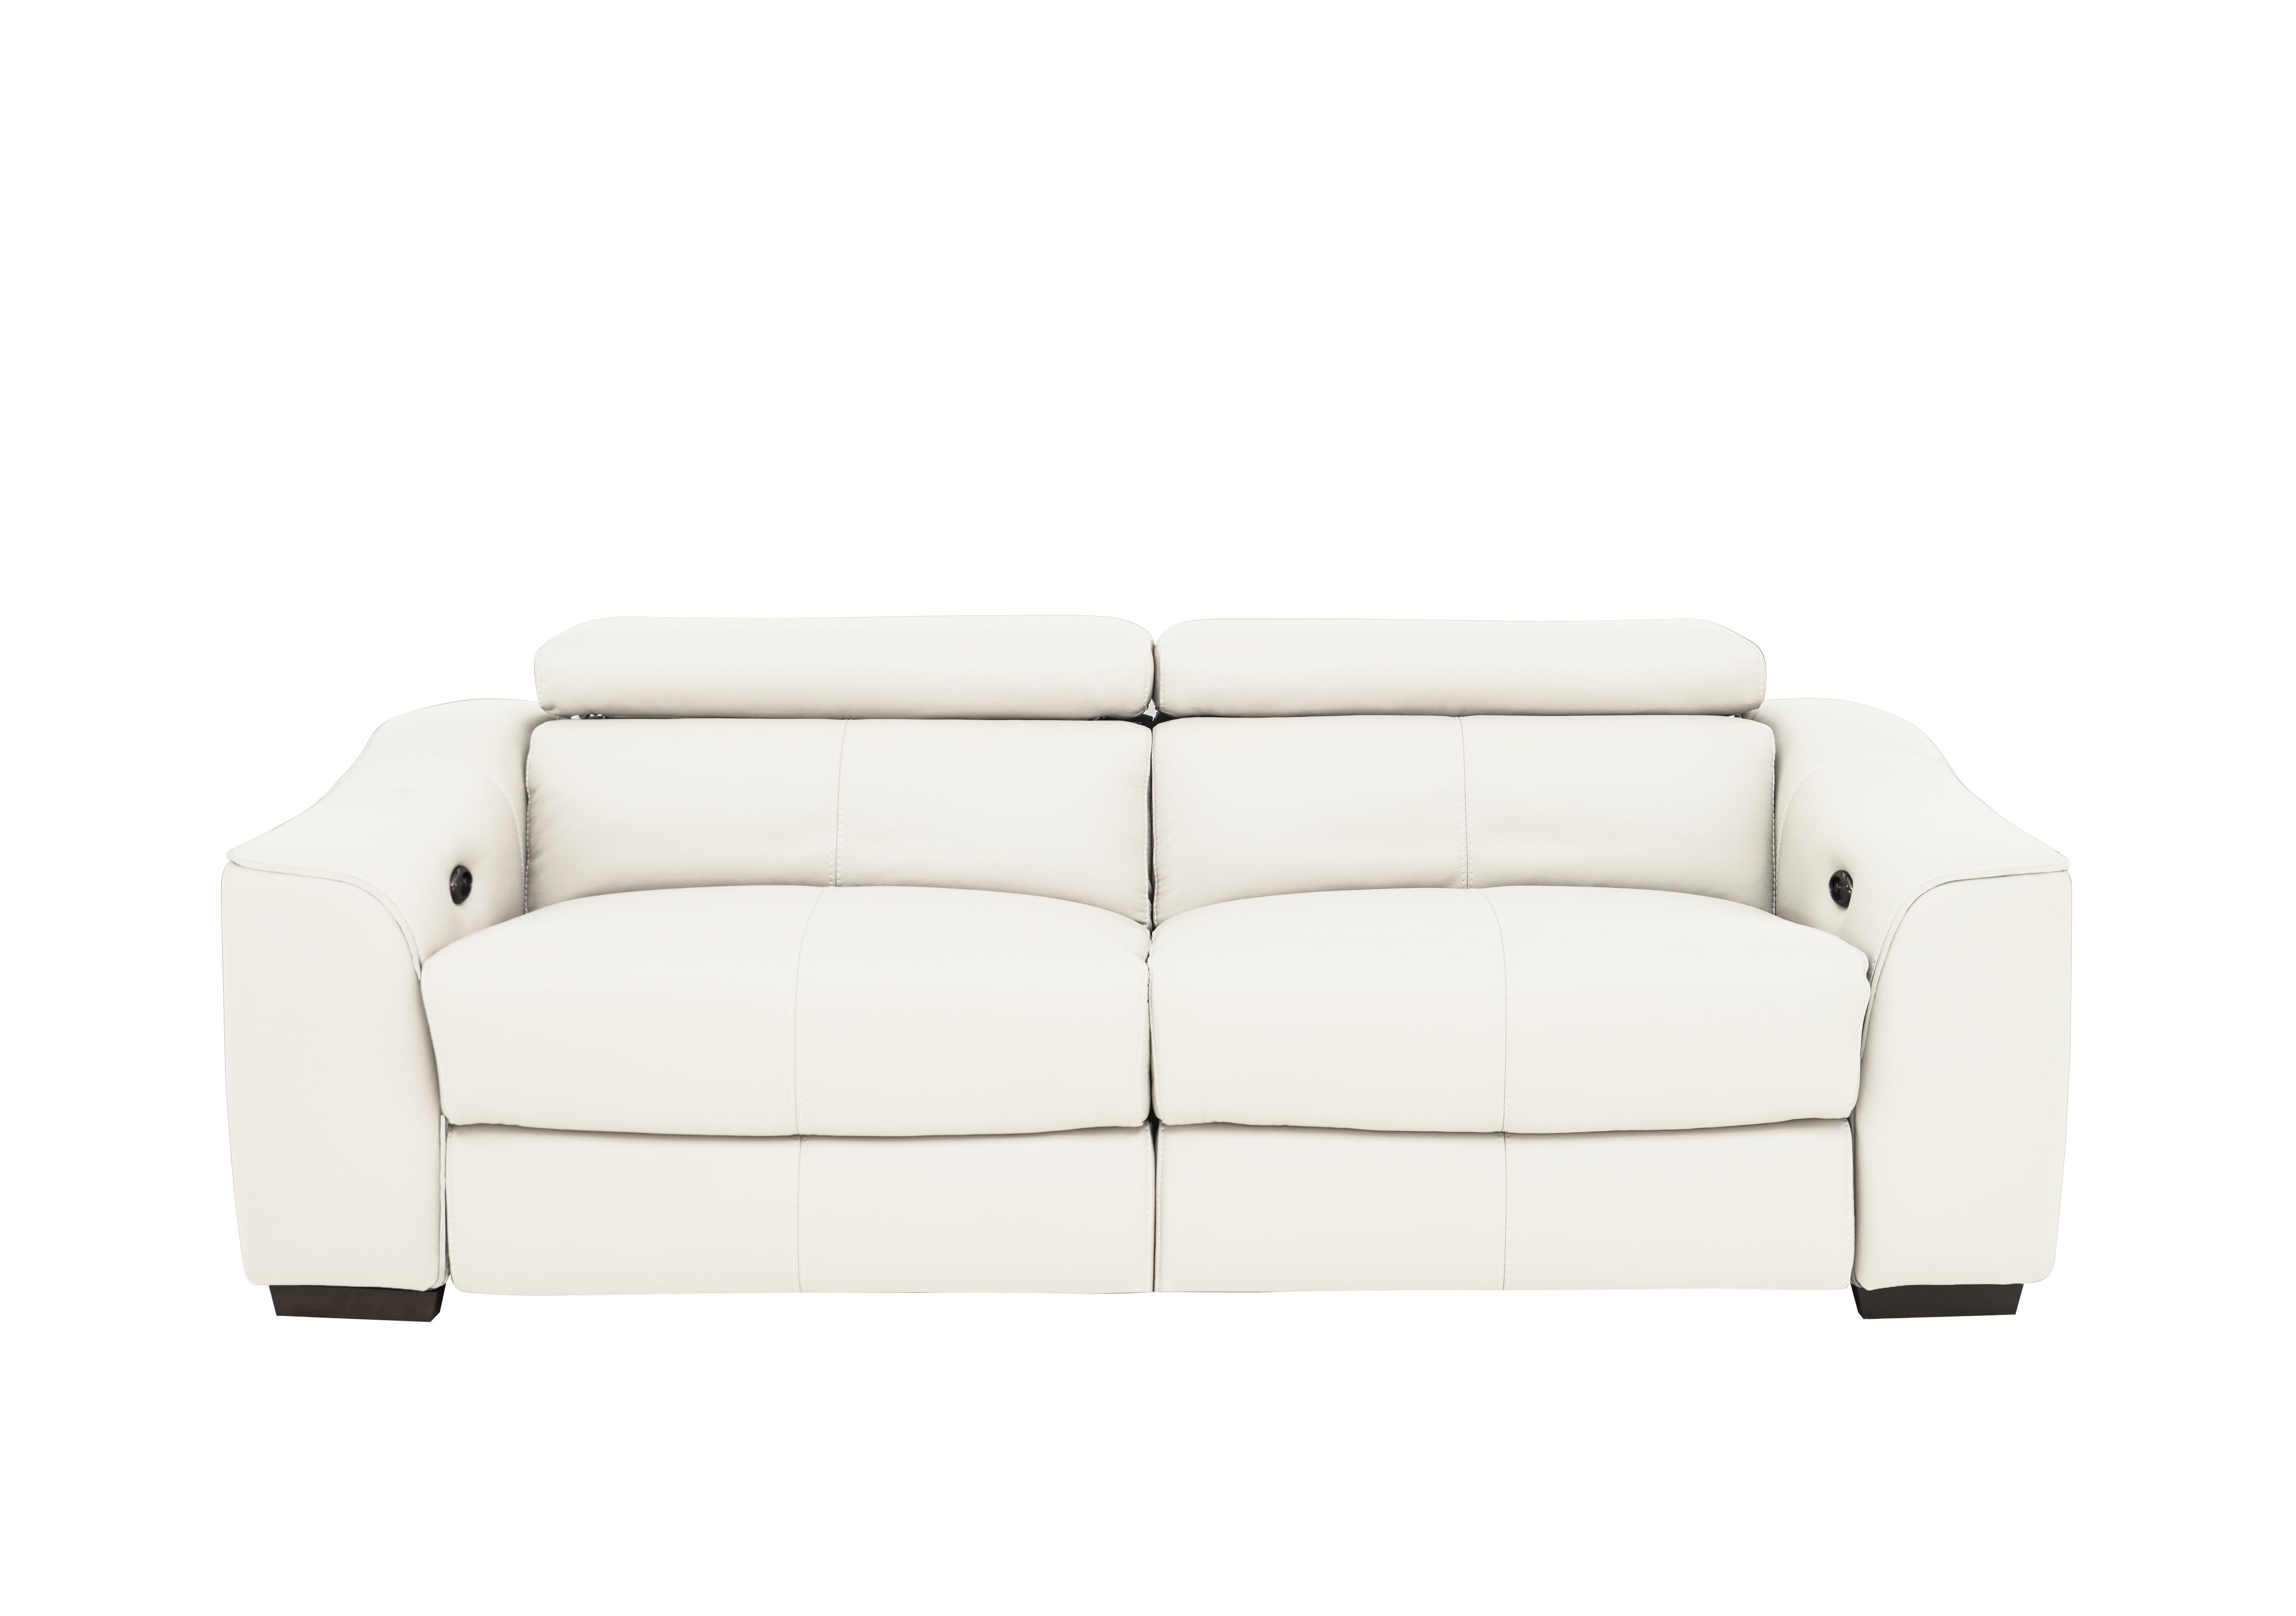 Elixir 3 Seater Leather Sofa in Bv-744d Star White on Furniture Village